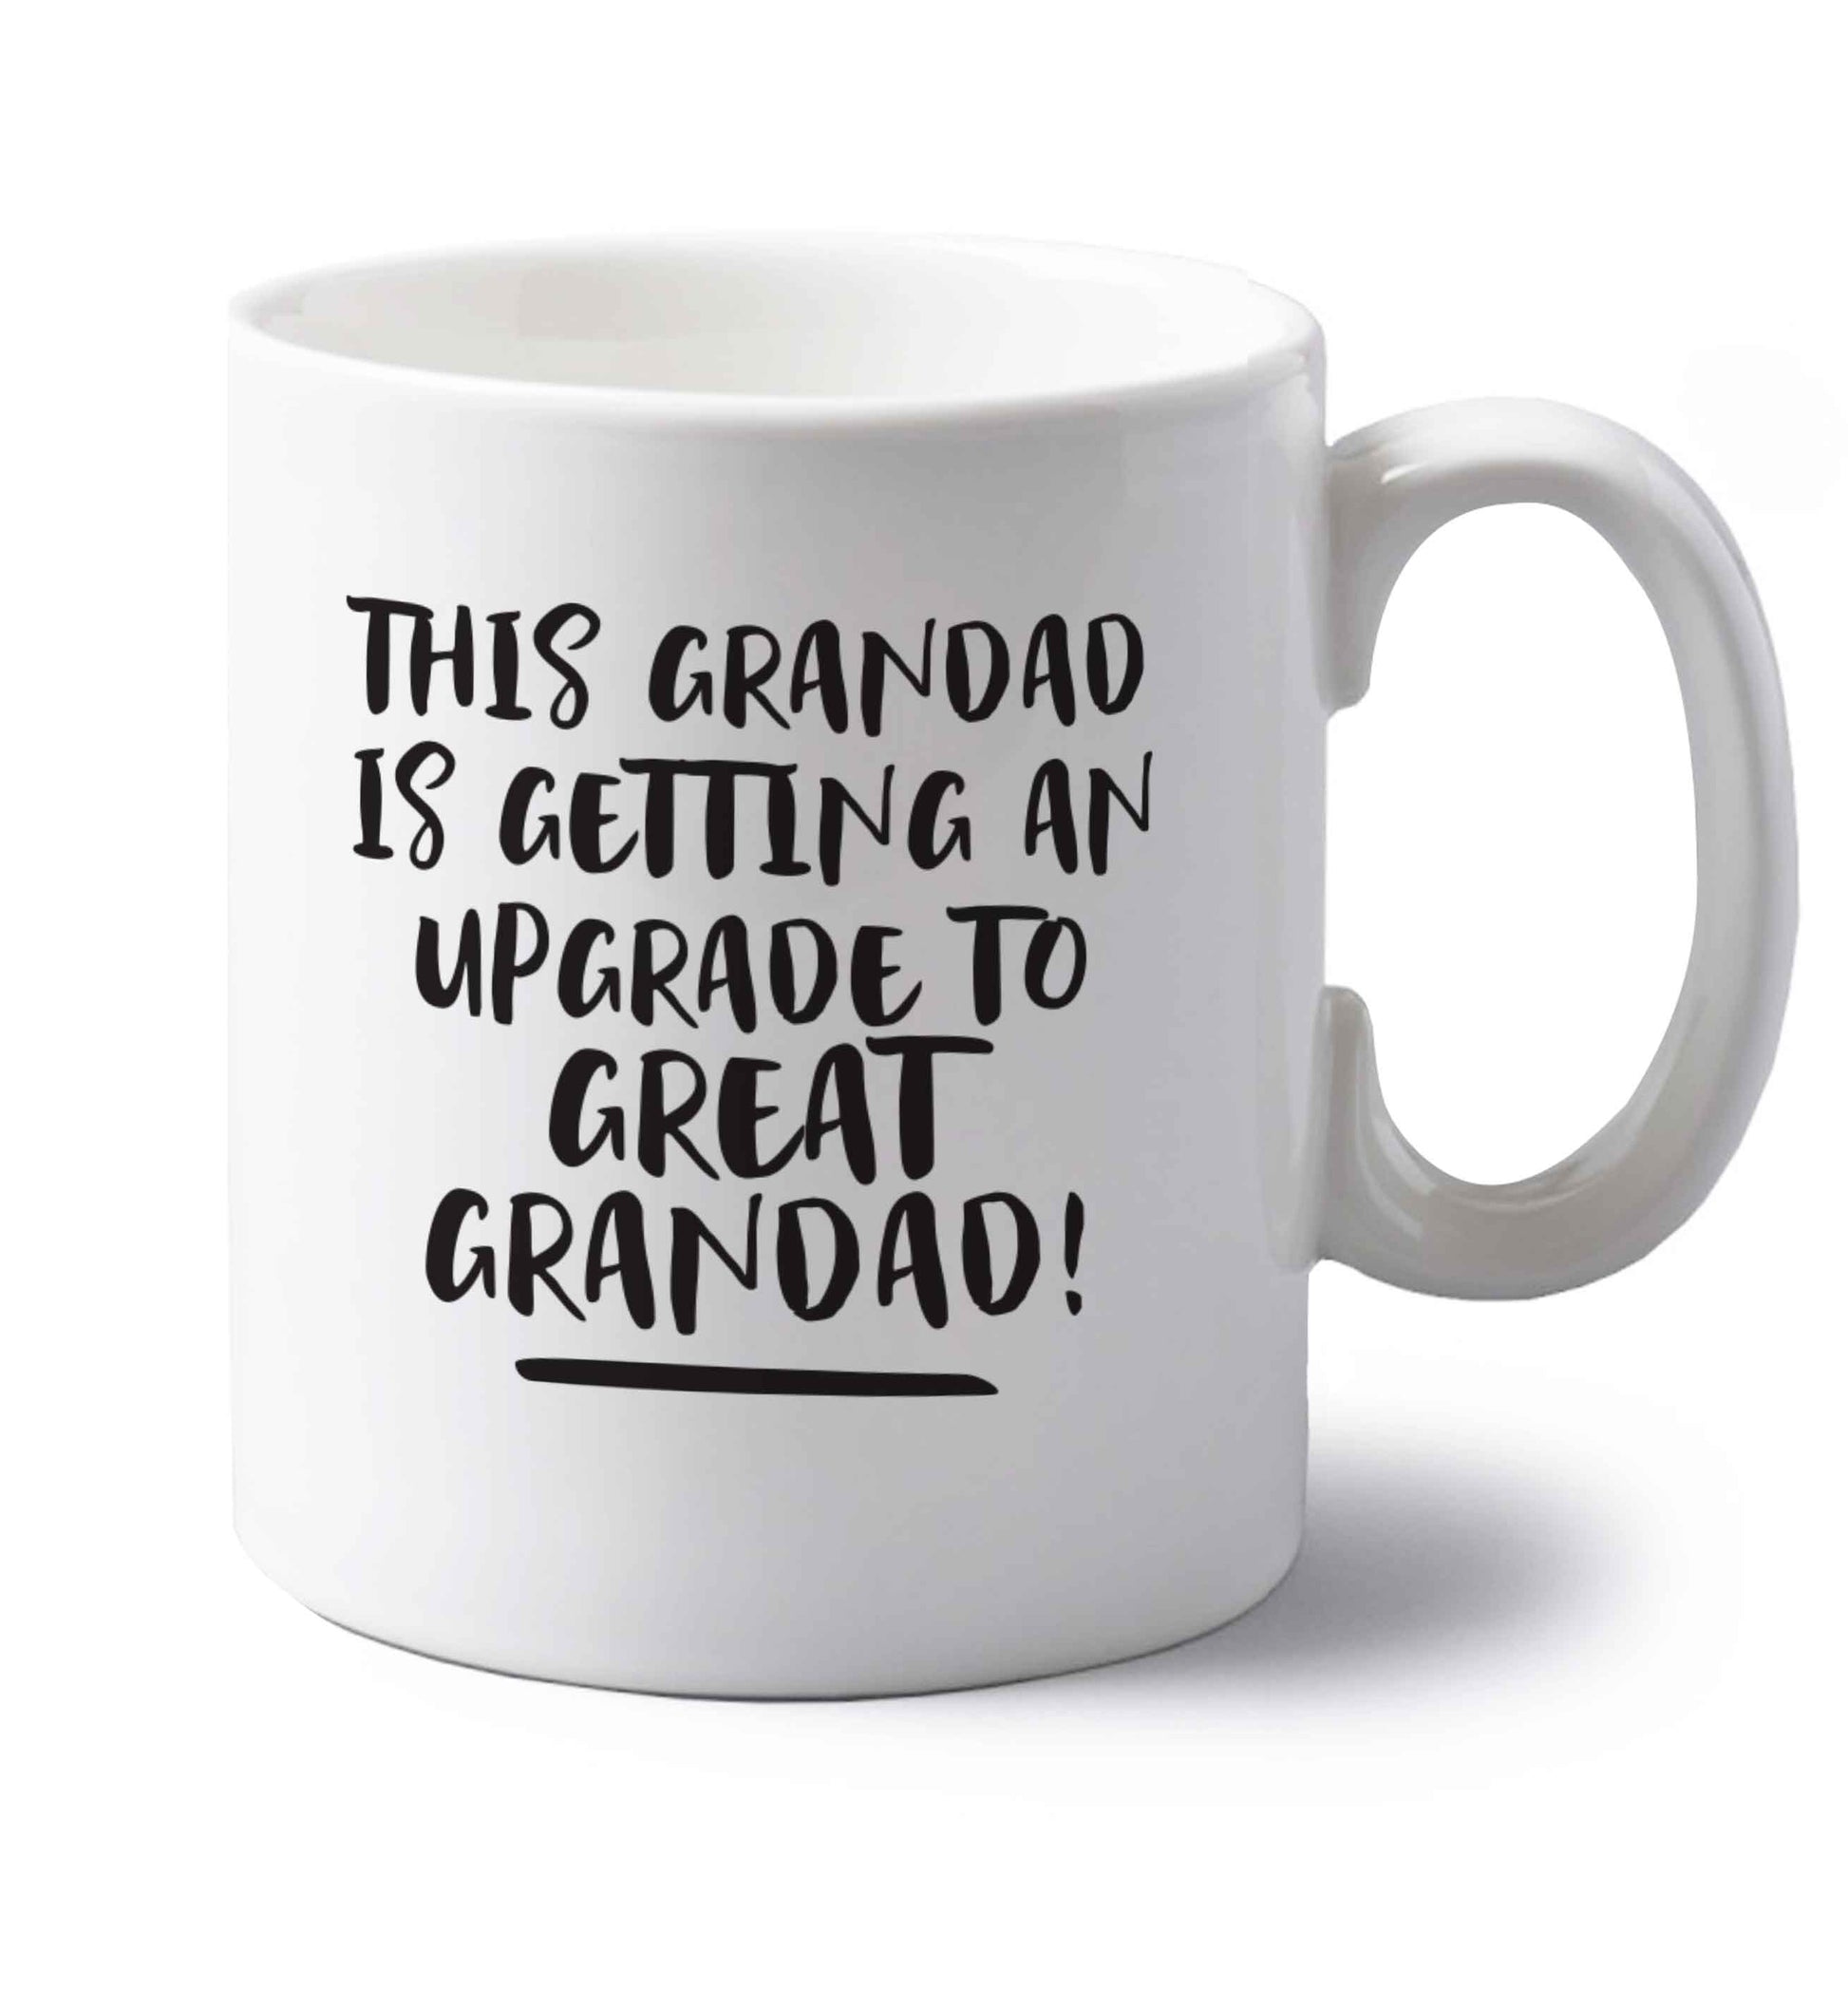 This grandad is getting an upgrade to great grandad! left handed white ceramic mug 